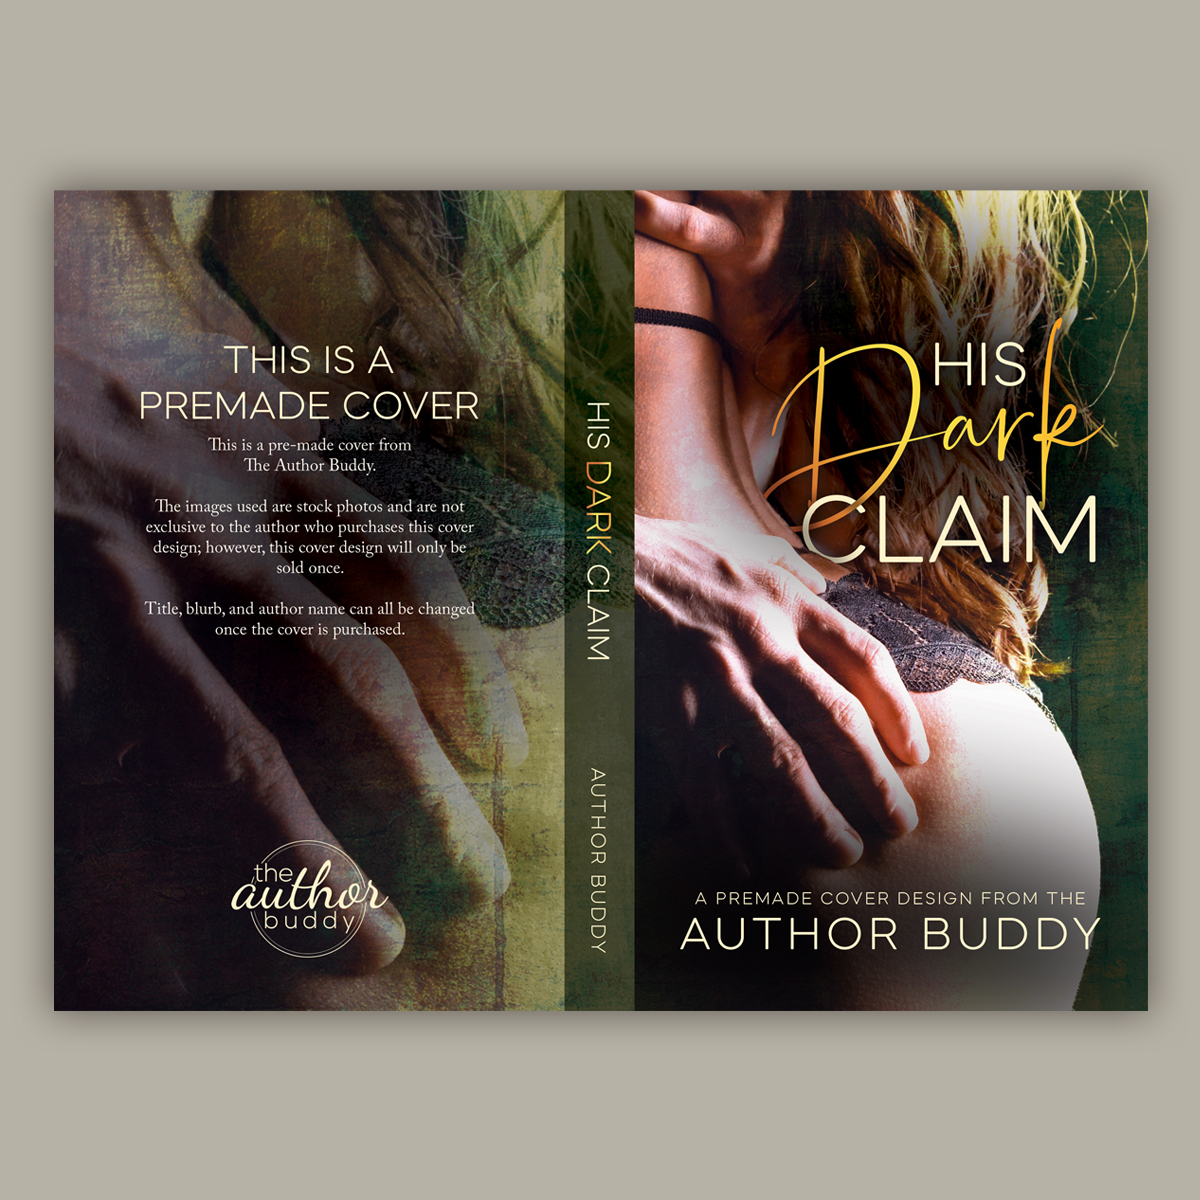 His Dark Claim - Premade Contemporary Dark Romance Book Cover from The Author Buddy